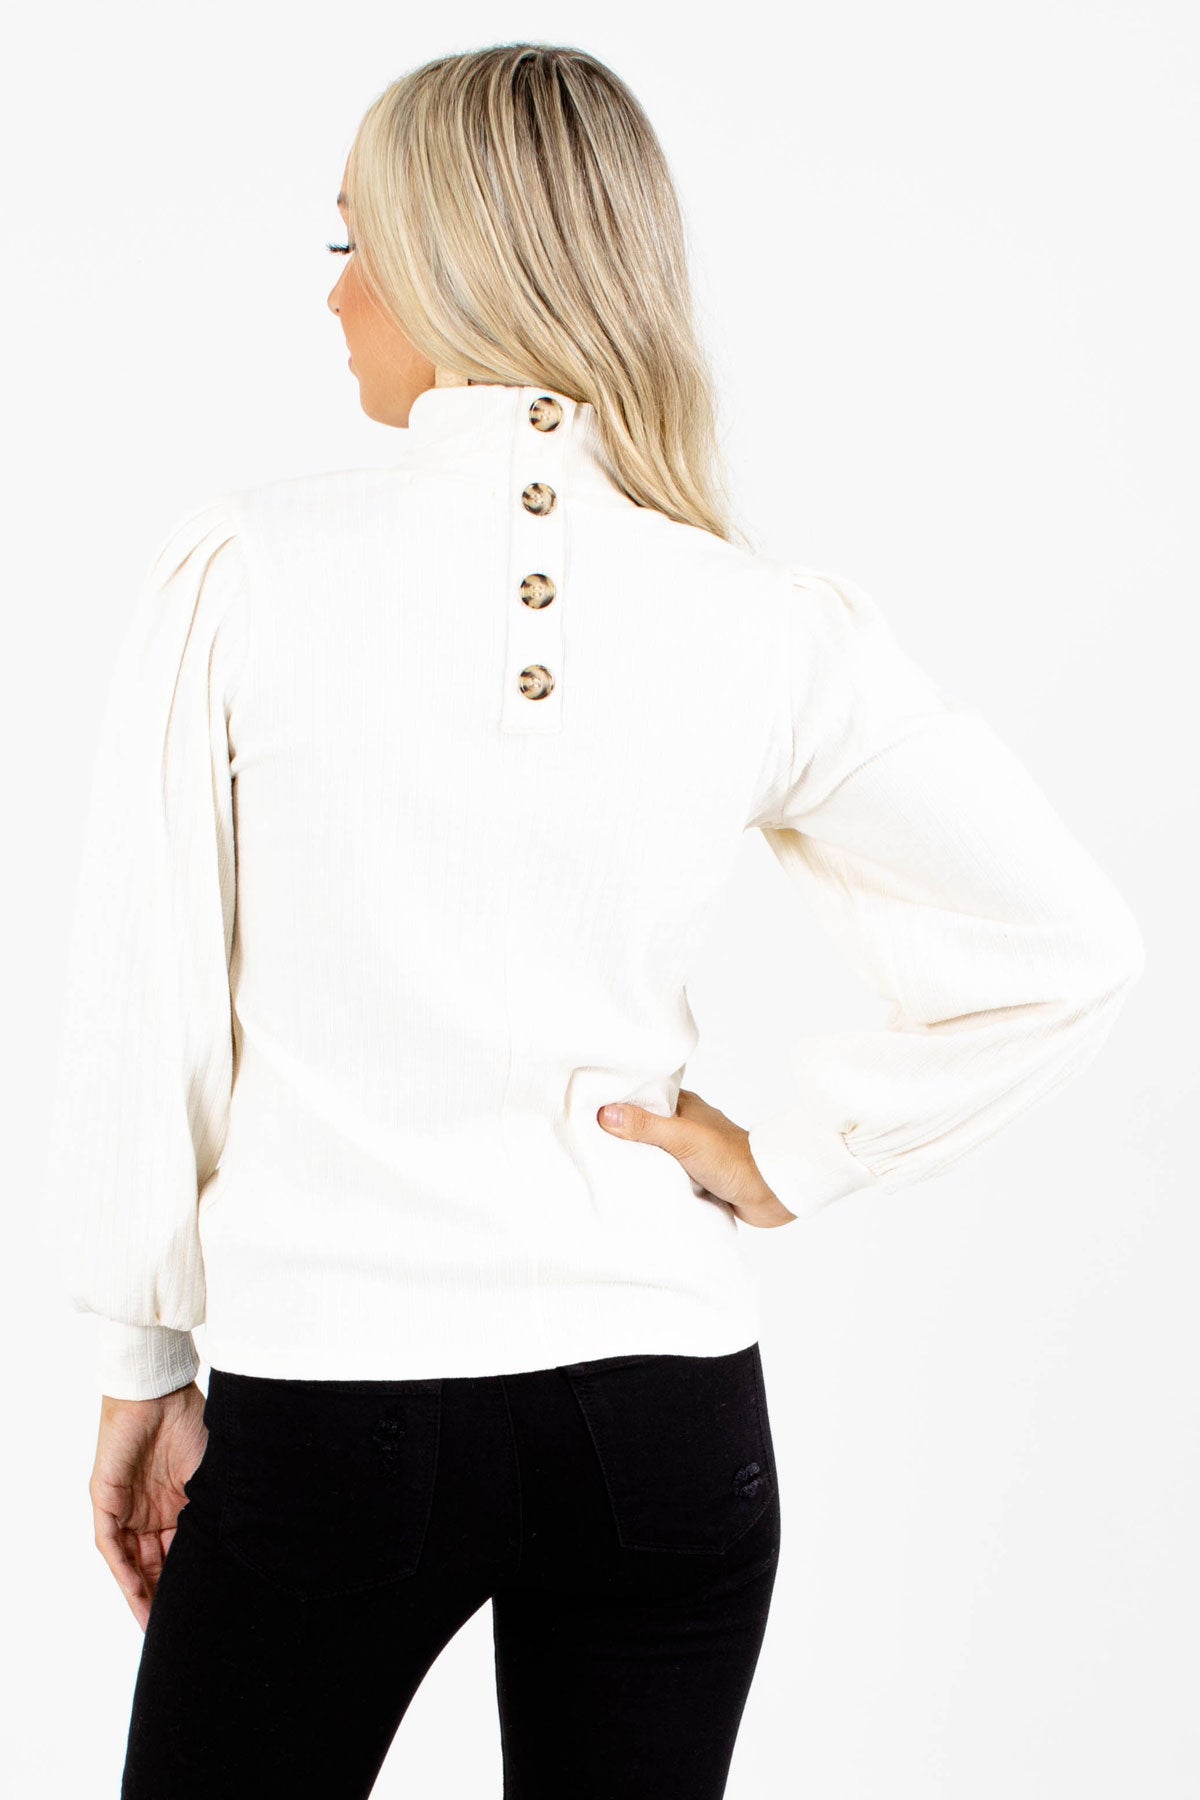 Women's White Business Casual Boutique Tops